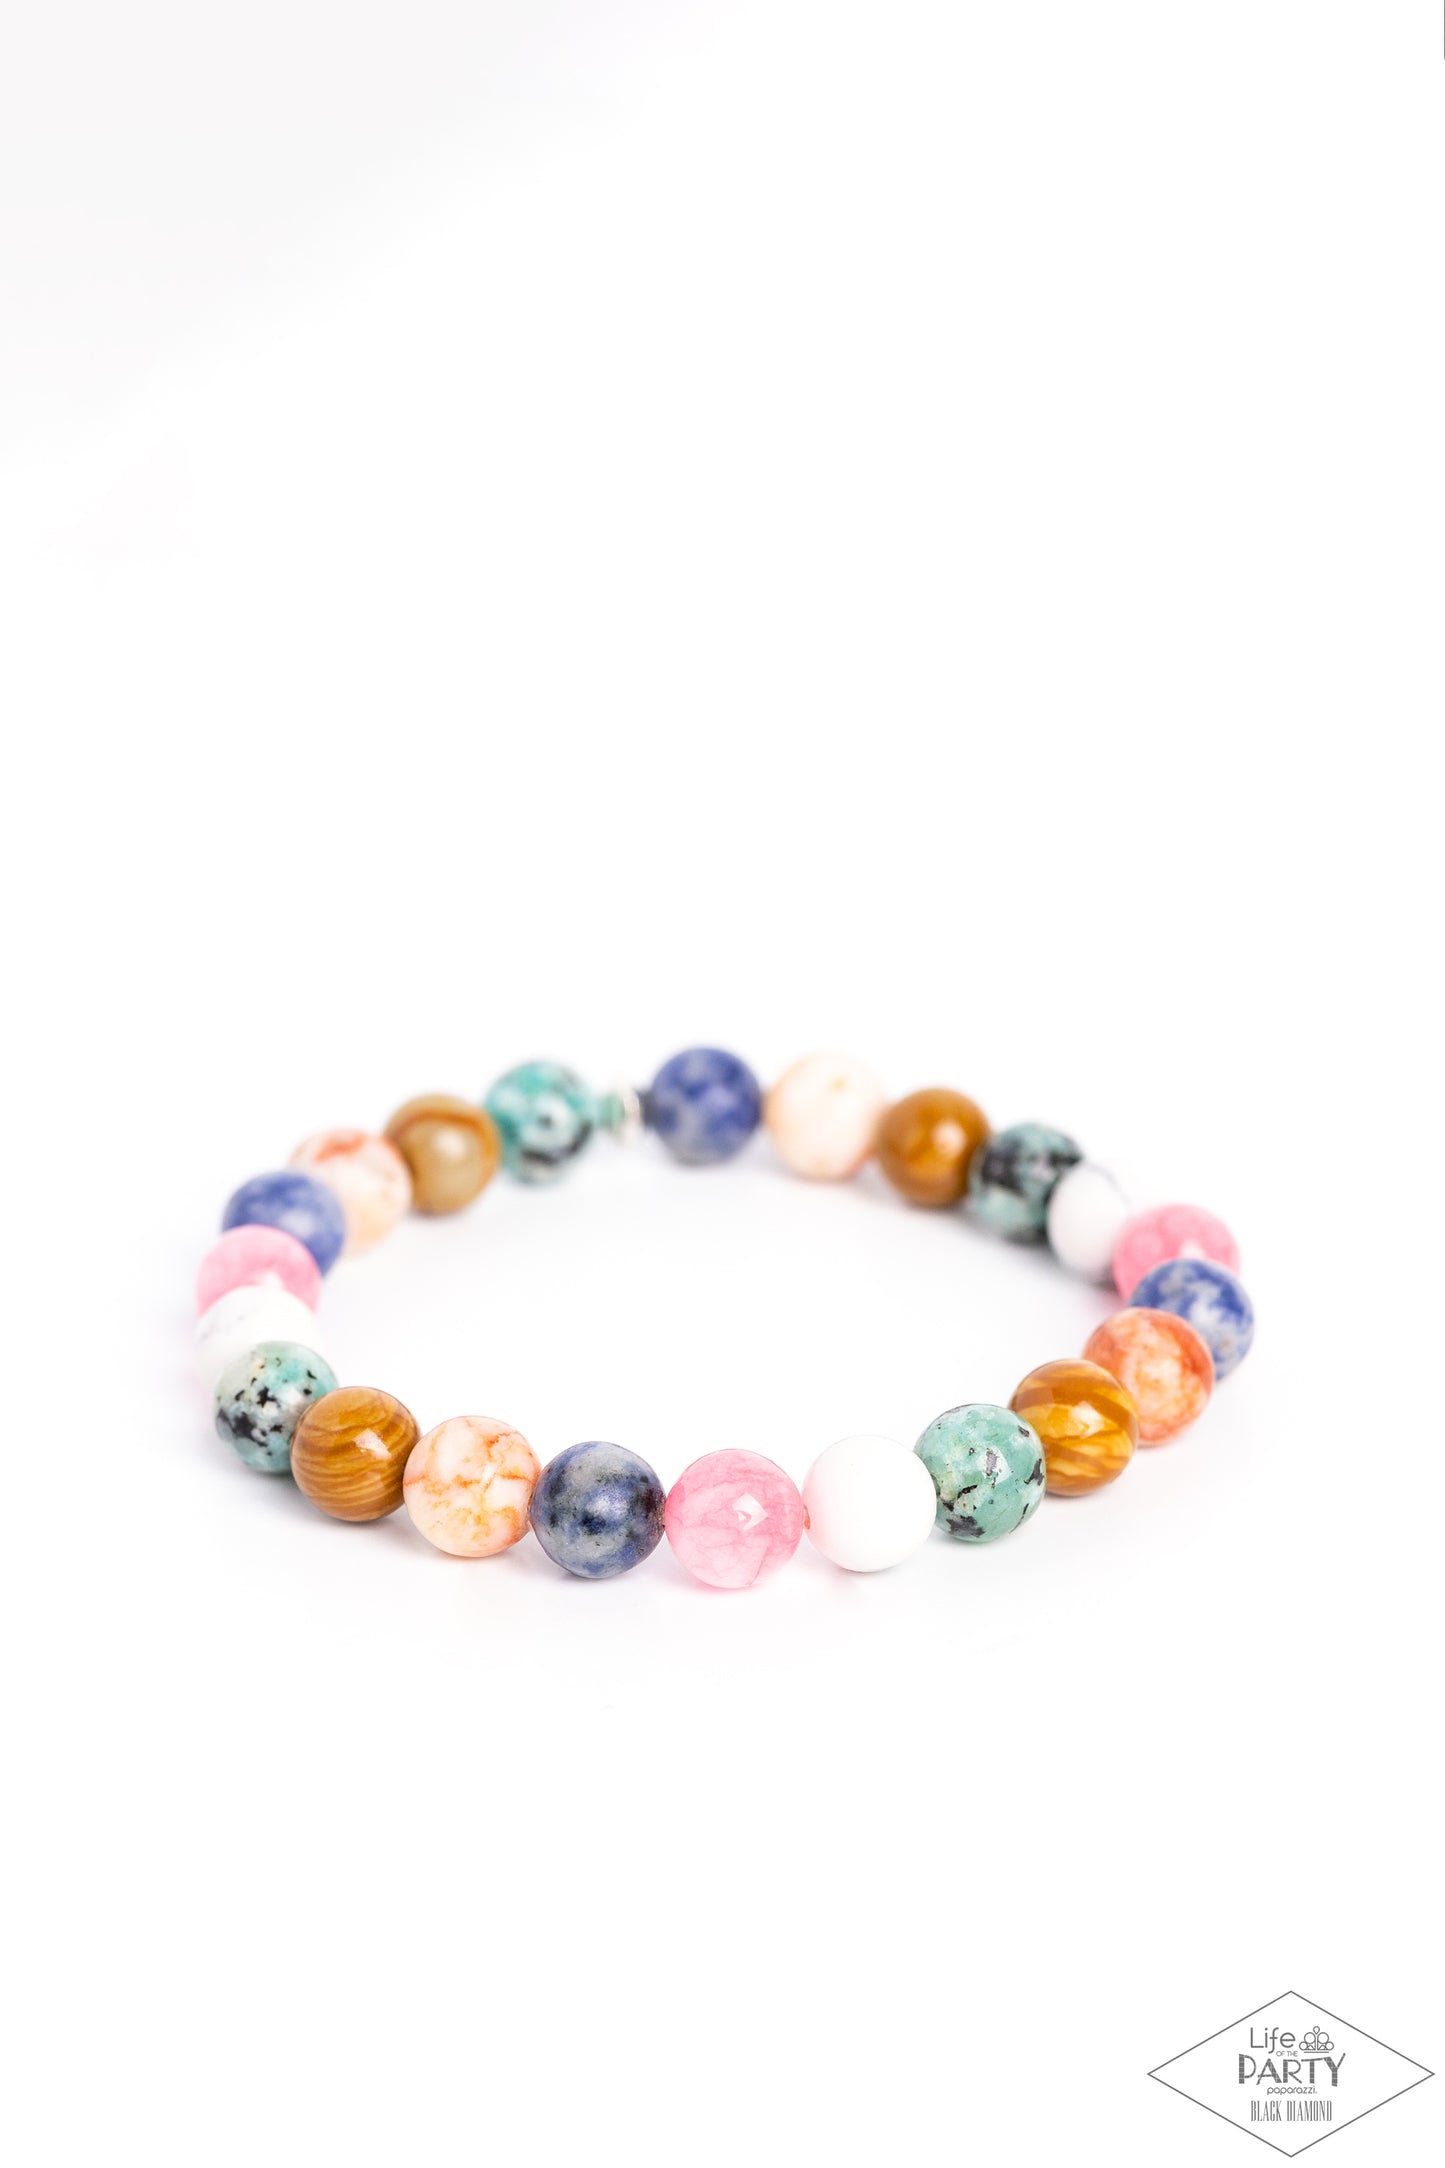 Infused with silver accents, a colorful collection of natural stones are threaded along a stretchy band around the wrist for a tranquil look.  Sold as one individual bracelet.